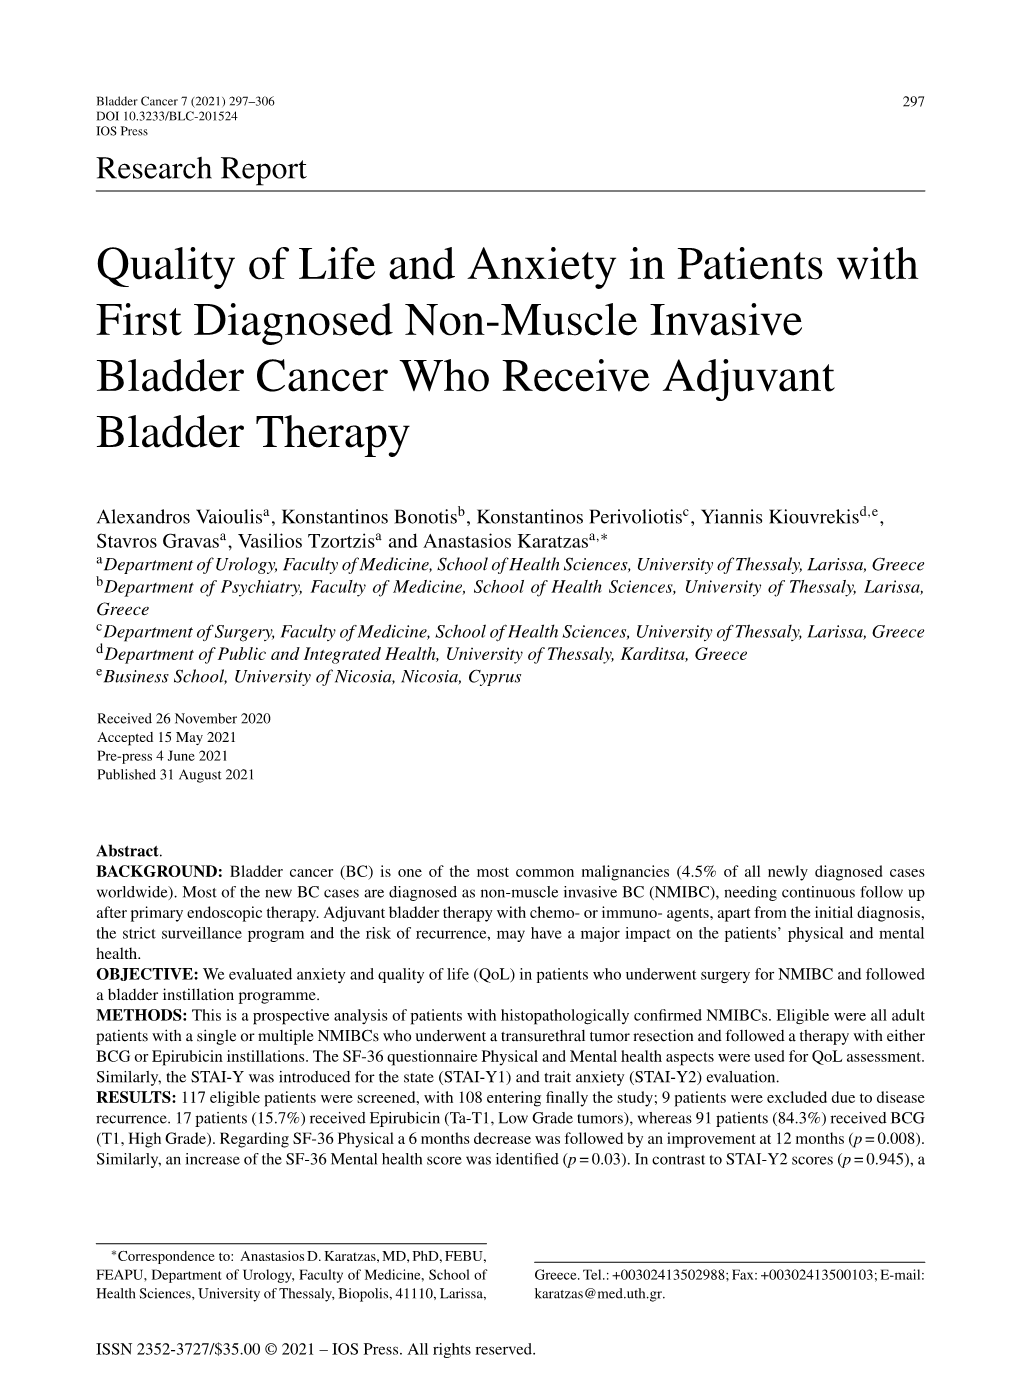 Quality of Life and Anxiety in Patients with First Diagnosed Non-Muscle Invasive Bladder Cancer Who Receive Adjuvant Bladder Therapy